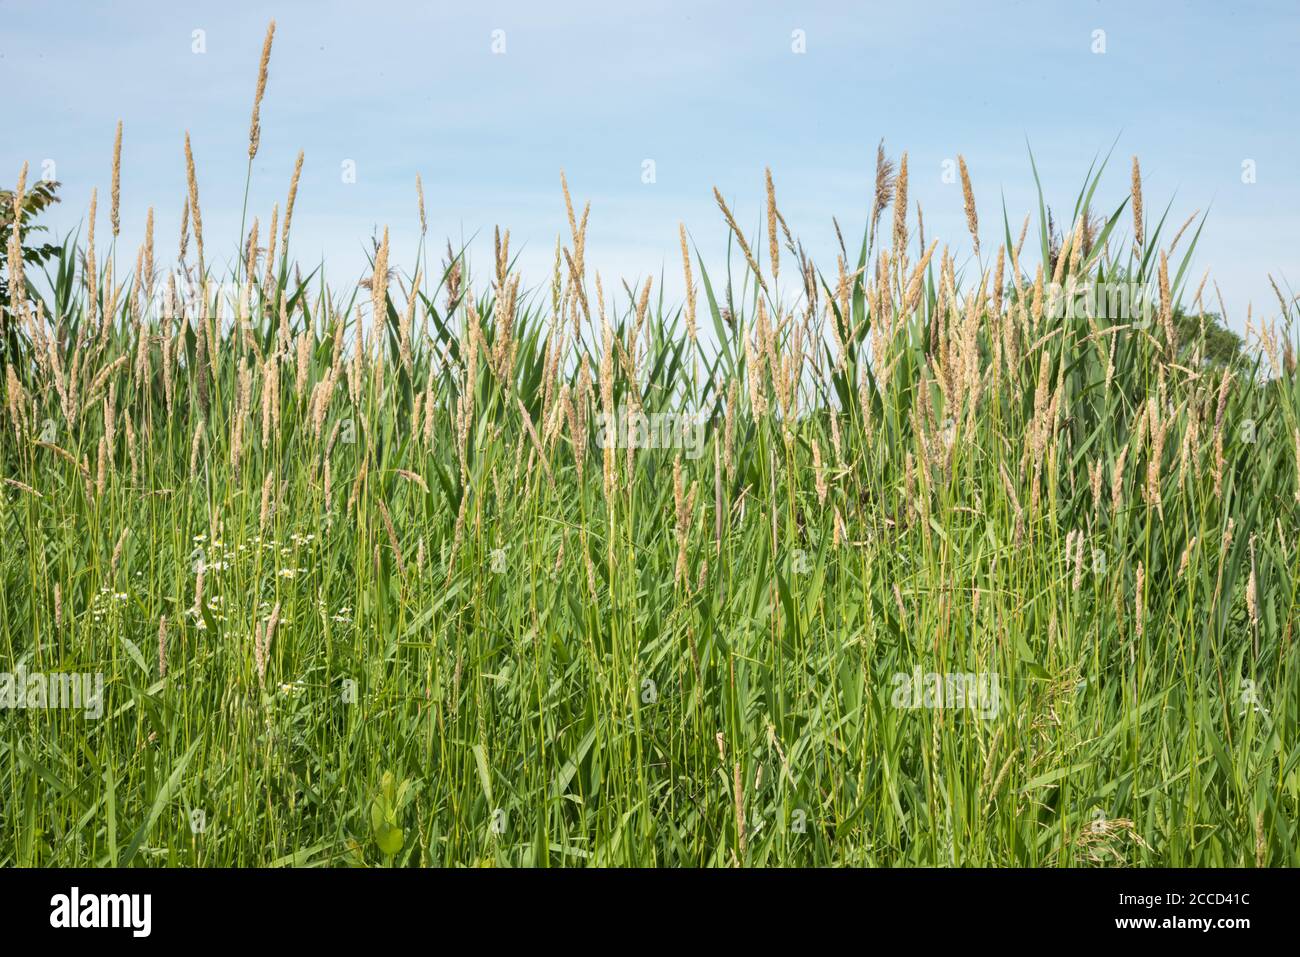 Natural tall grasses growing in meadow under a blue sky in Aurora, Illinois Stock Photo